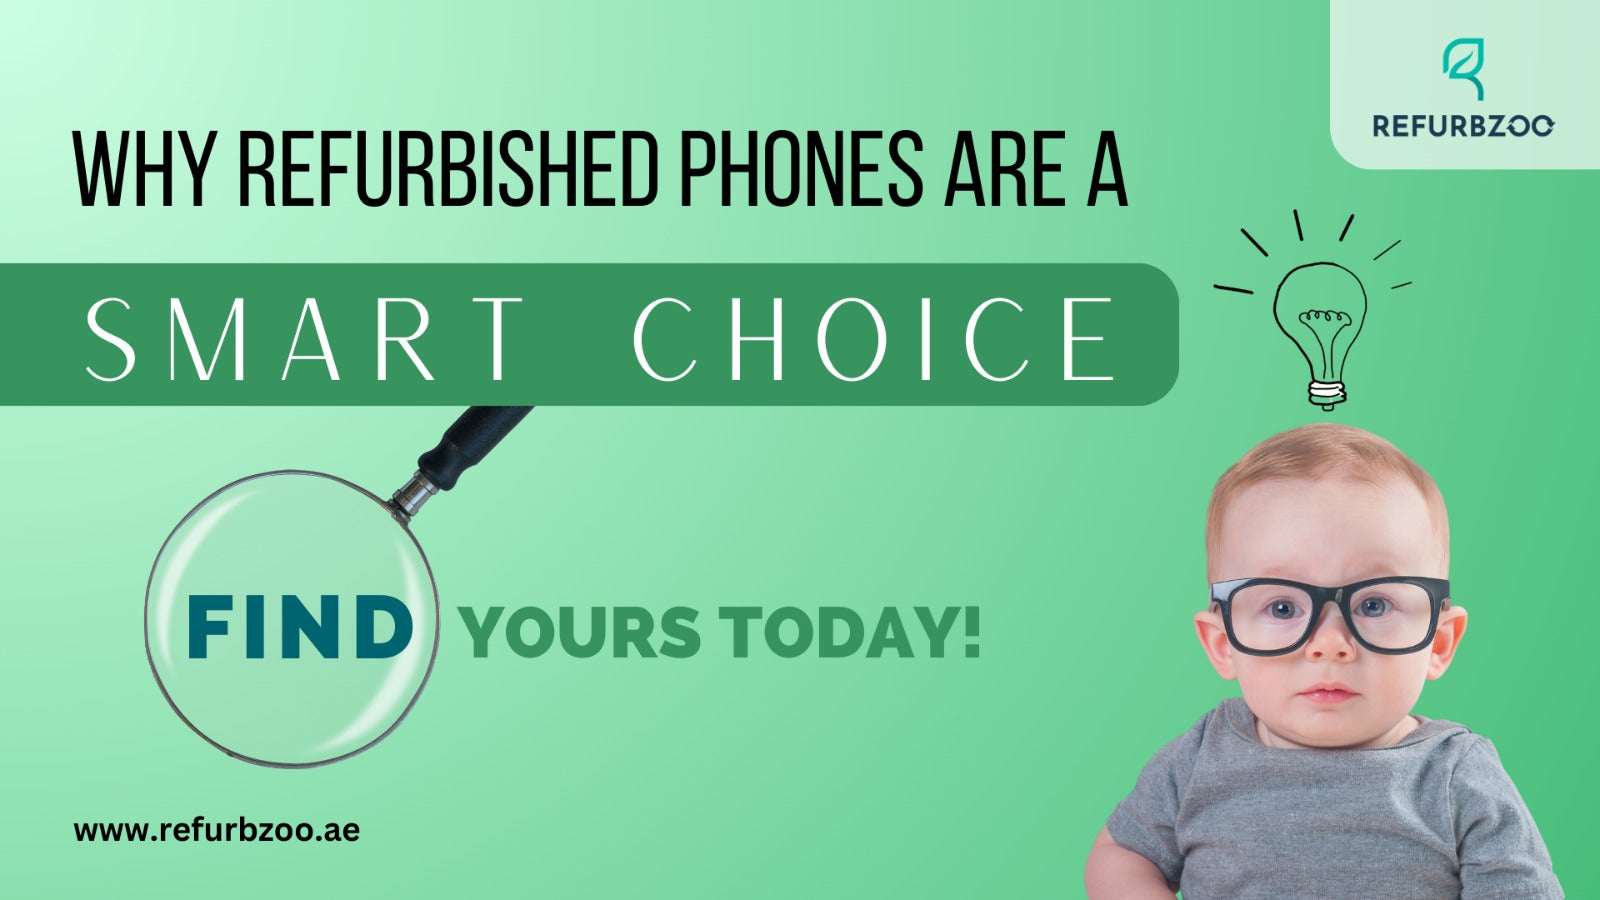 Why Refurbished Phones Are a Smart Choice: Find Yours Today!